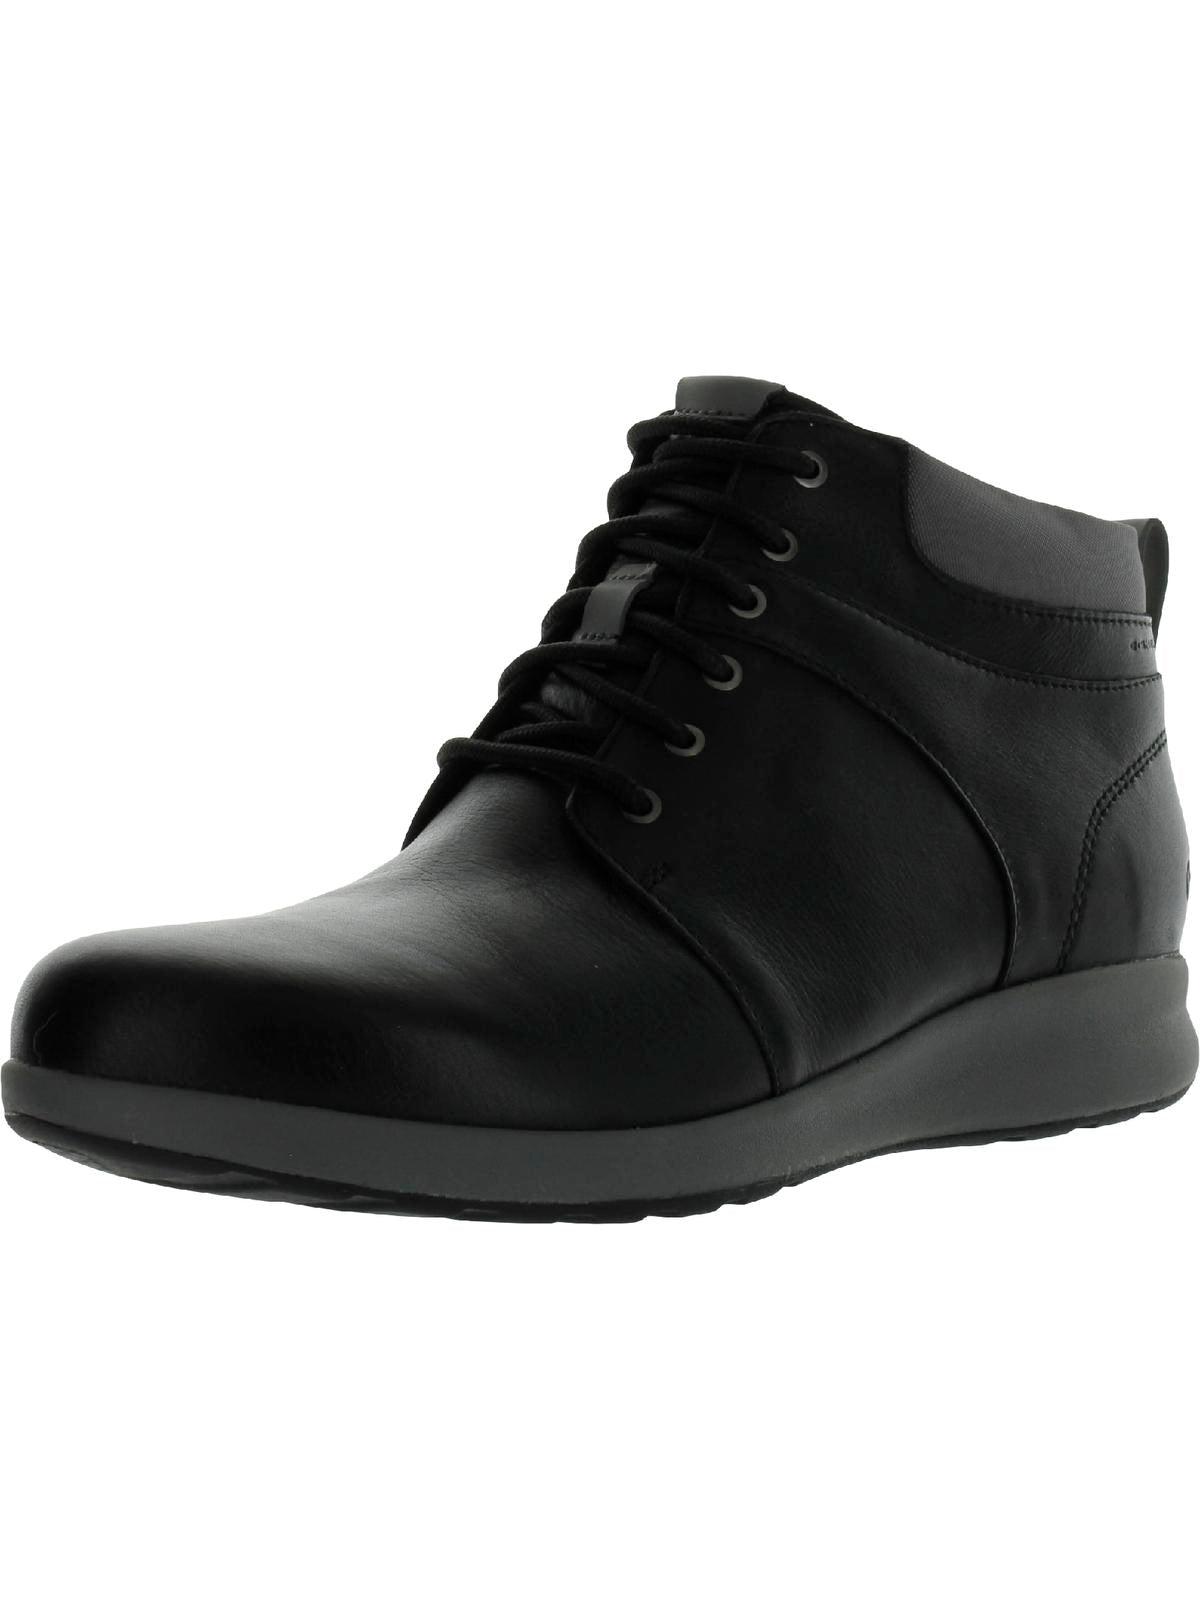 Clarks Un Adorn Walk Leather Round Toe Ankle Boots in Black | Lyst